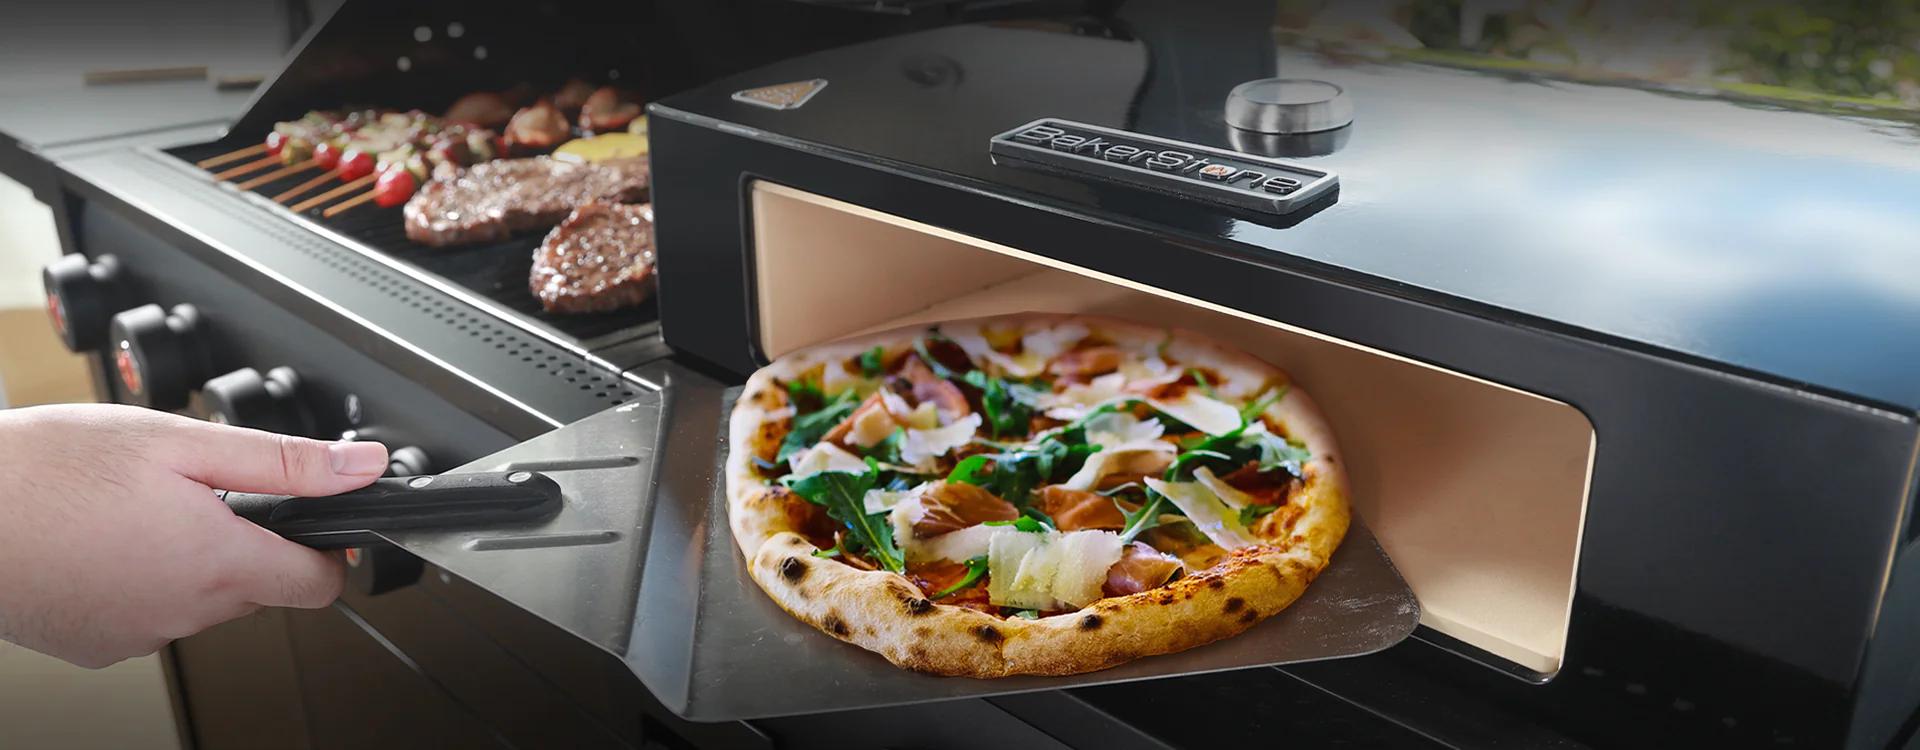 bakerstone pizza oven - What is the difference between a pizza oven and a pizza stone